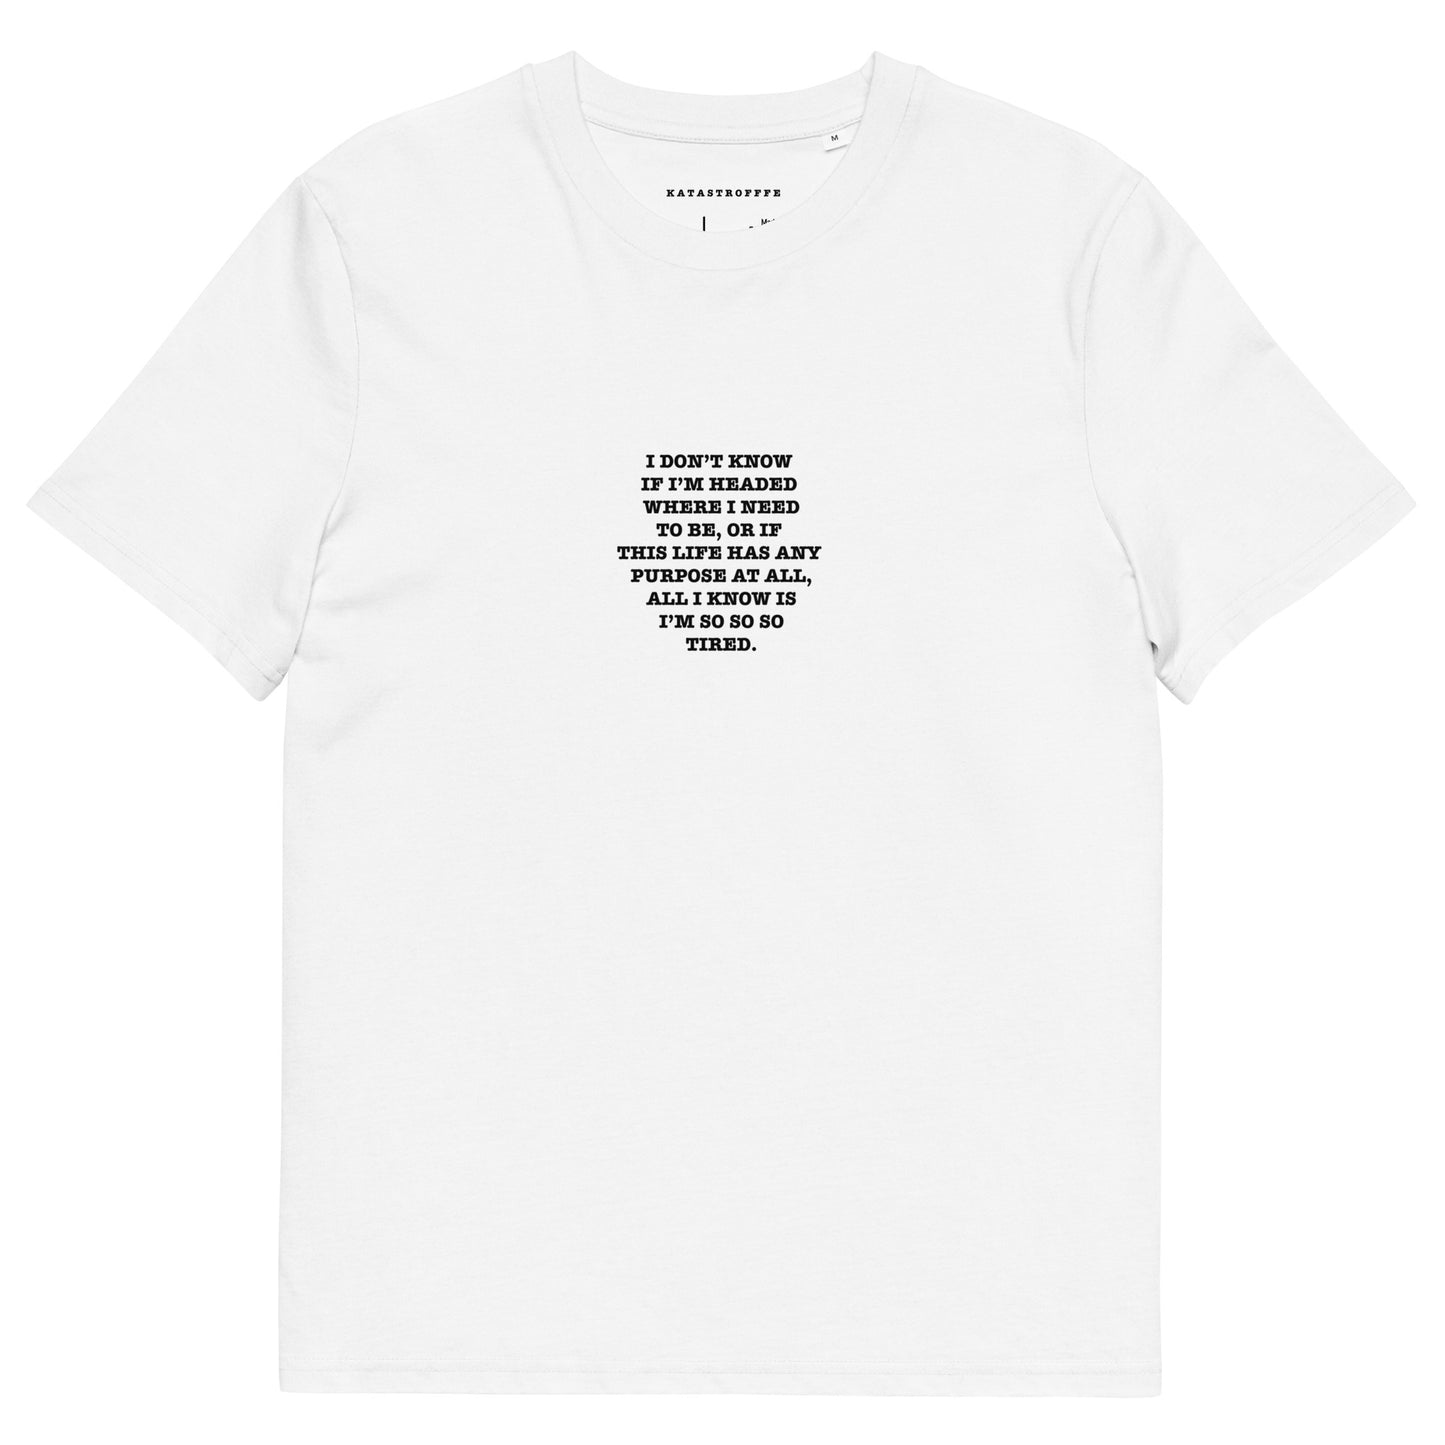 I DON’T KNOW  IF I’M HEADED  WHERE I NEED TO BE, OR IF  THIS LIFE HAS ANY  PURPOSE AT ALL, ALL I KNOW IS I’M SO SO SO TIRED. Unisex organic cotton t-shirt